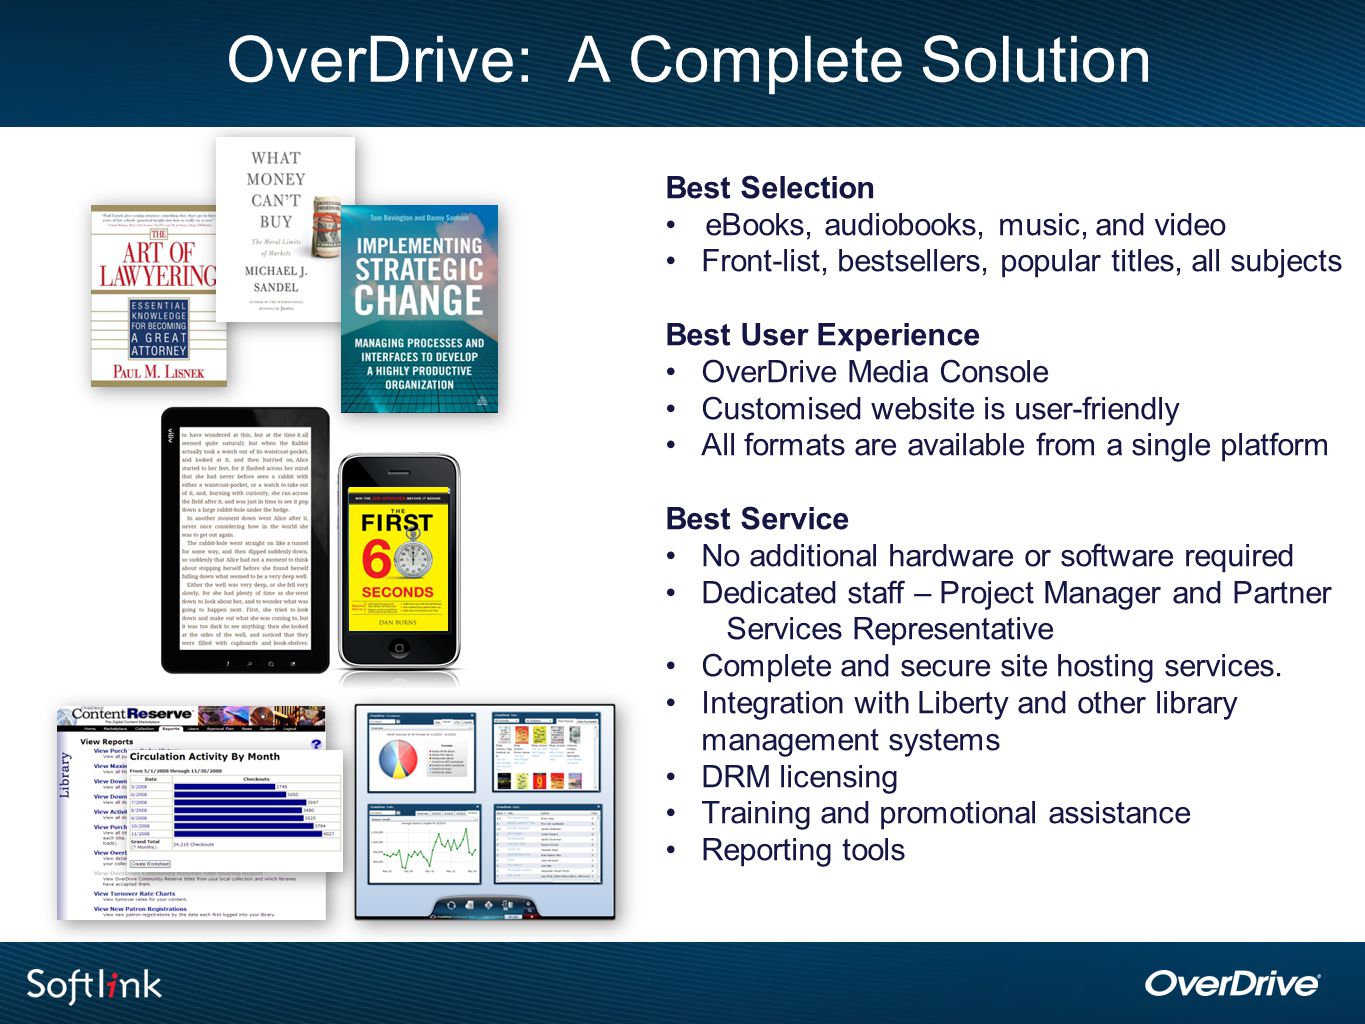 OverDrive: A Complete Solution Best Selection eBooks, audiobooks, music, and video Front-list, bestsellers, popular titles, all subjects Best User Experience OverDrive Media Console Customised website is user-friendly All formats are available from a single platform Best Service No additional hardware or software required Dedicated staff – Project Manager and Partner Services Representative Complete and secure site hosting services.